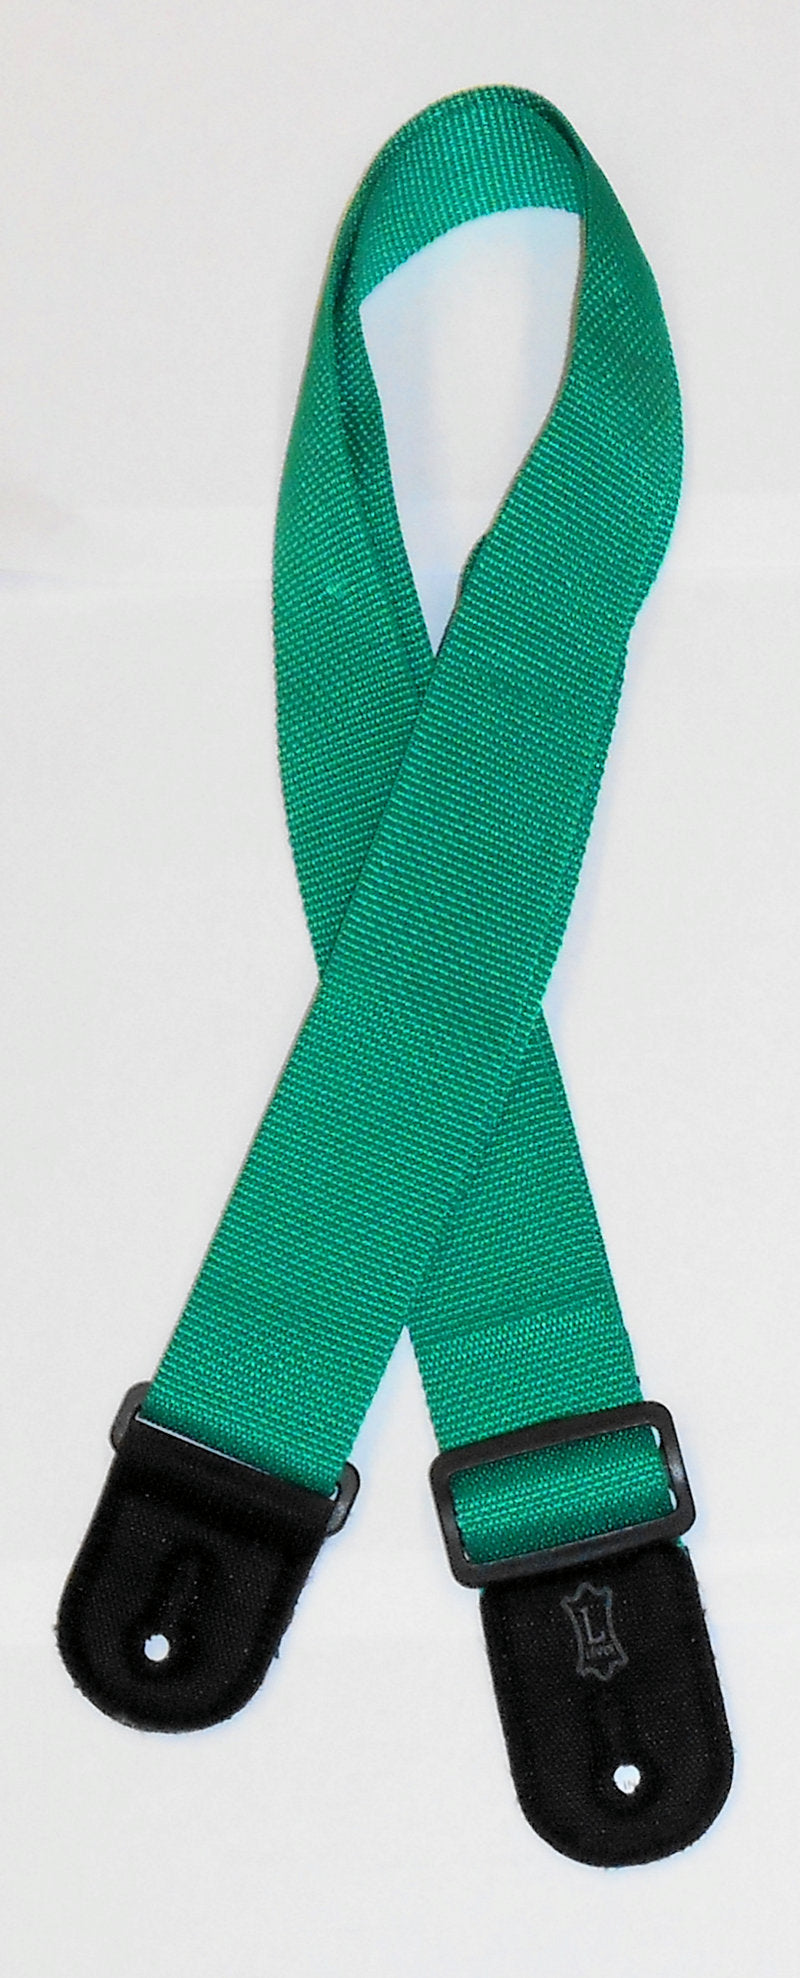 An adjustable green nylon strap with black buckles.